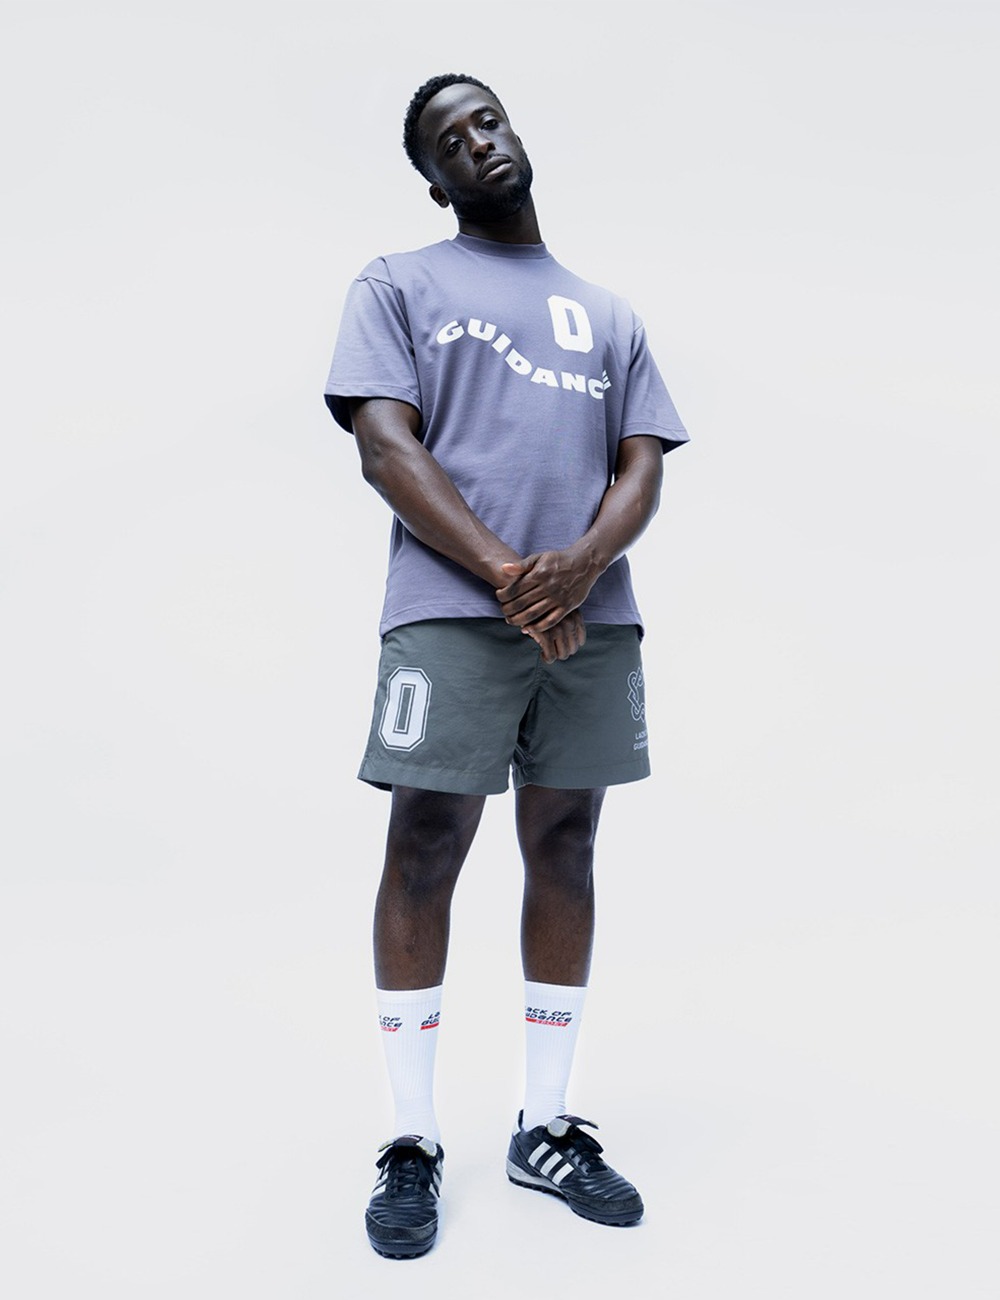 LACK OF GUIDANCE SS22 LOOKBOOK